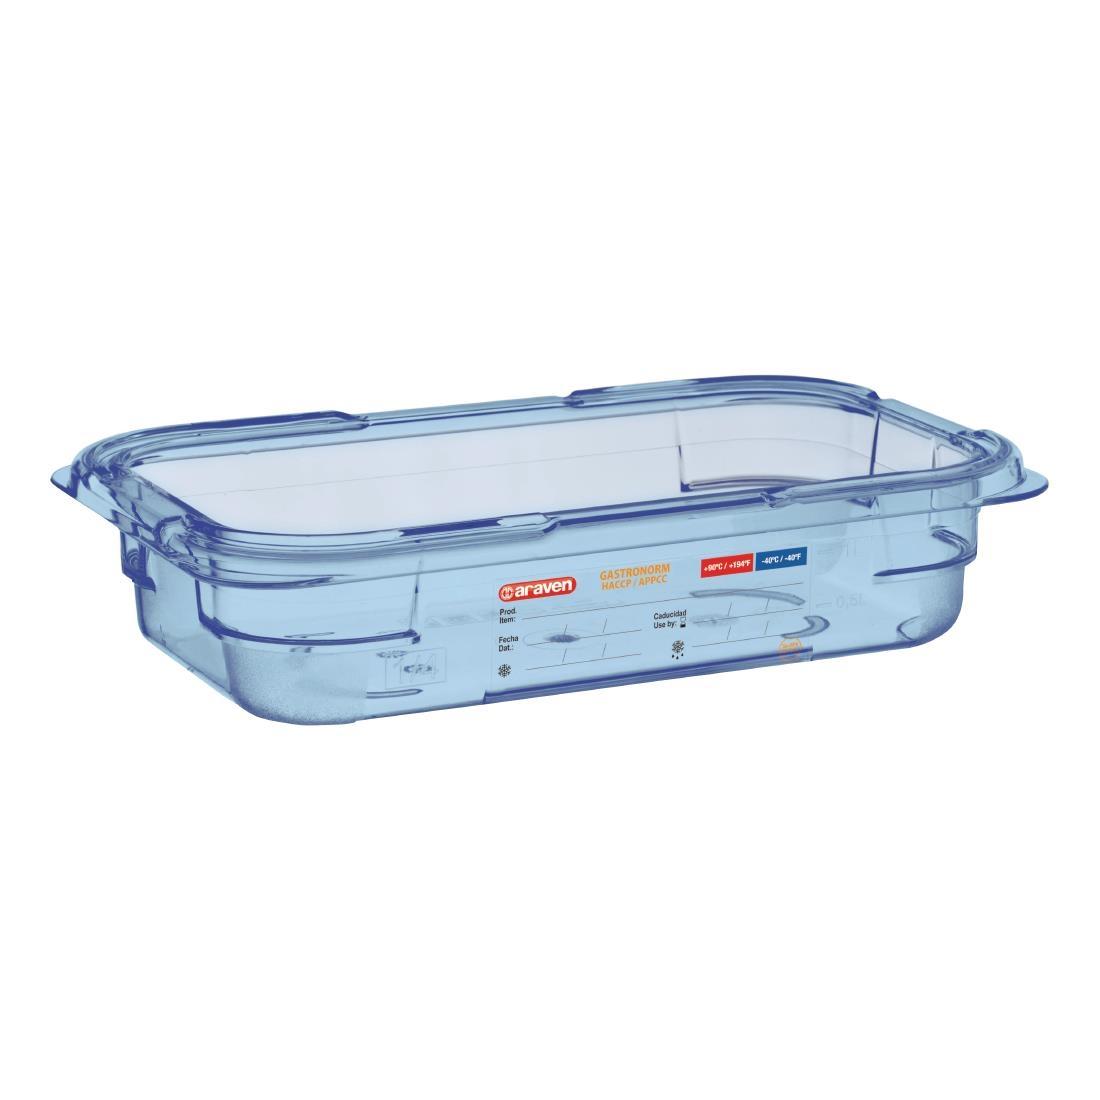 Araven ABS Food Storage Container Blue GN 1/4 65mm - GP574  - 1